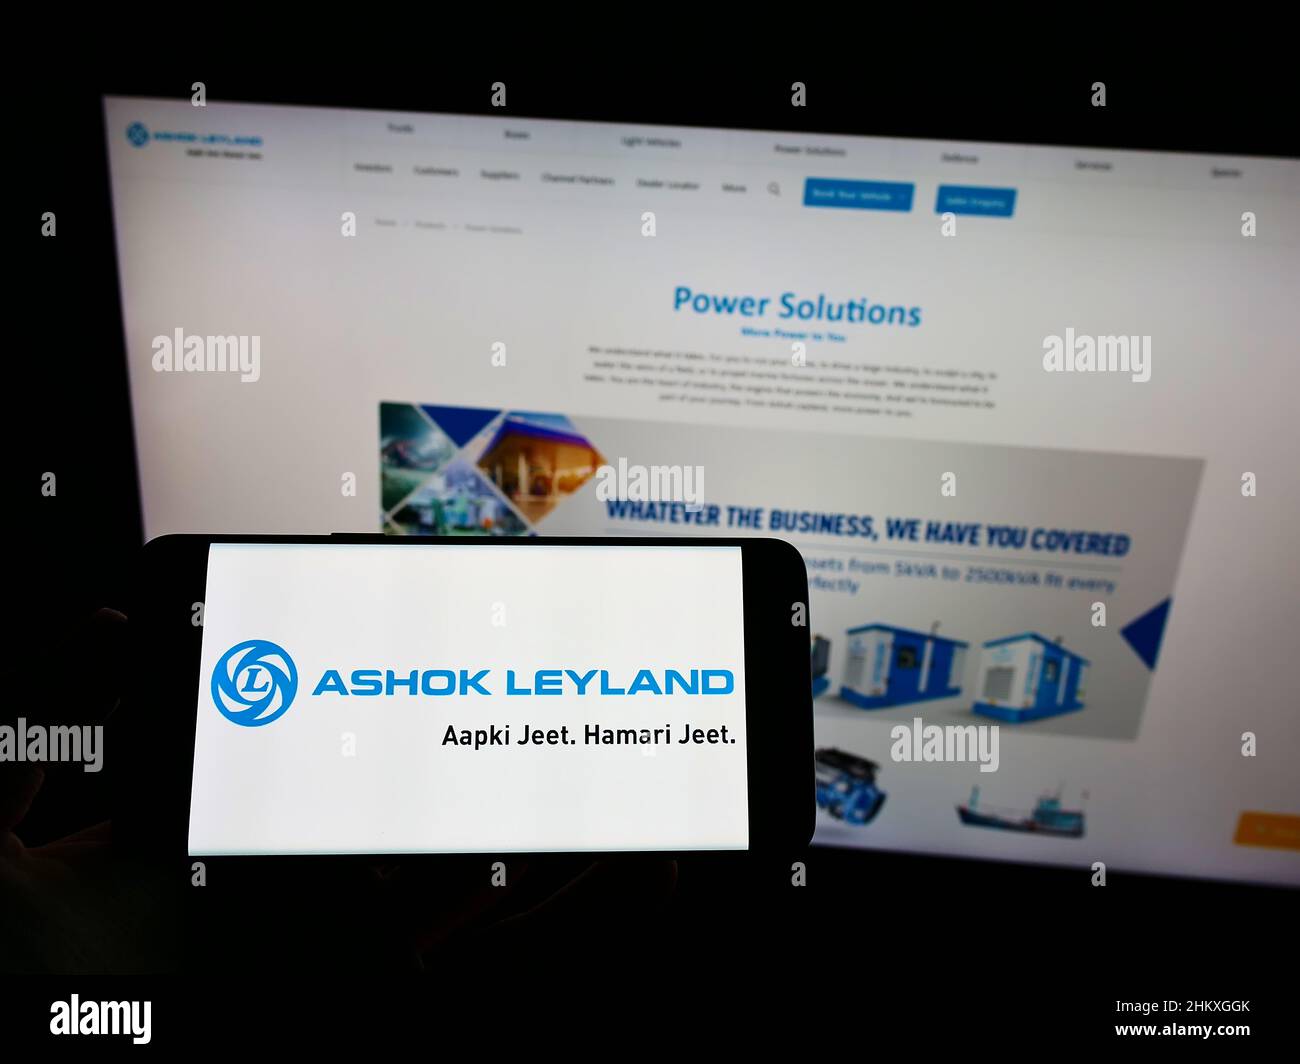 Person holding mobile phone with logo of Indian automotive company Ashok Leyland Ltd. on screen in front of web page. Focus on phone display. Stock Photo